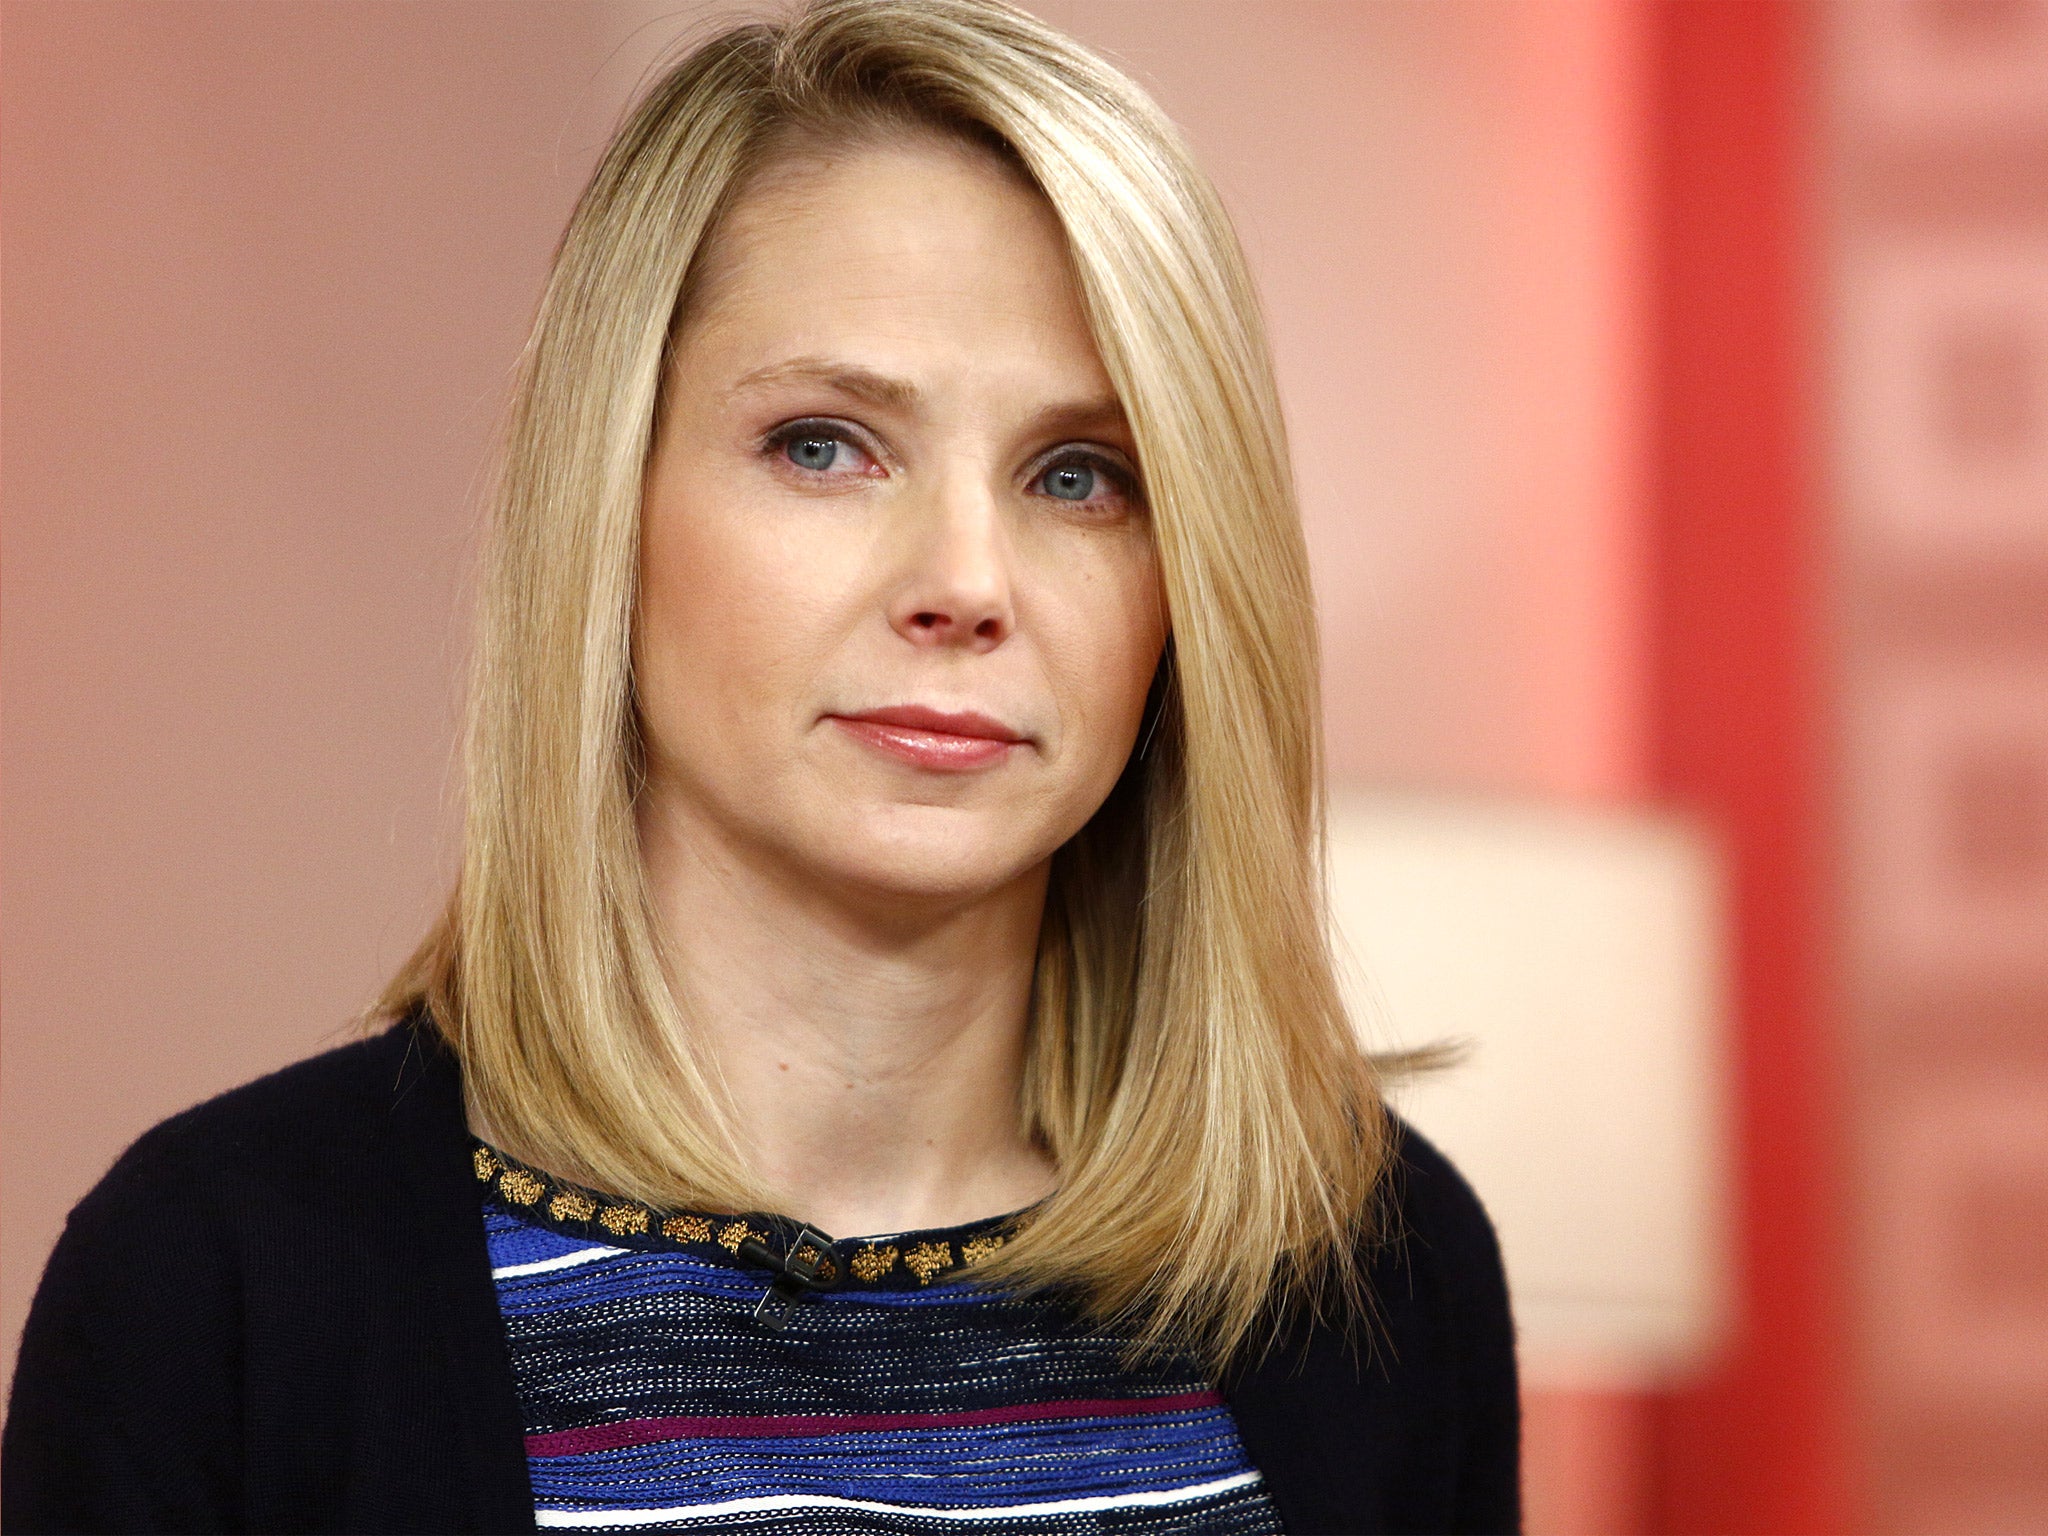 'Corporate America’s most celebrated working mother': Marissa Mayer, CEO of Yahoo!